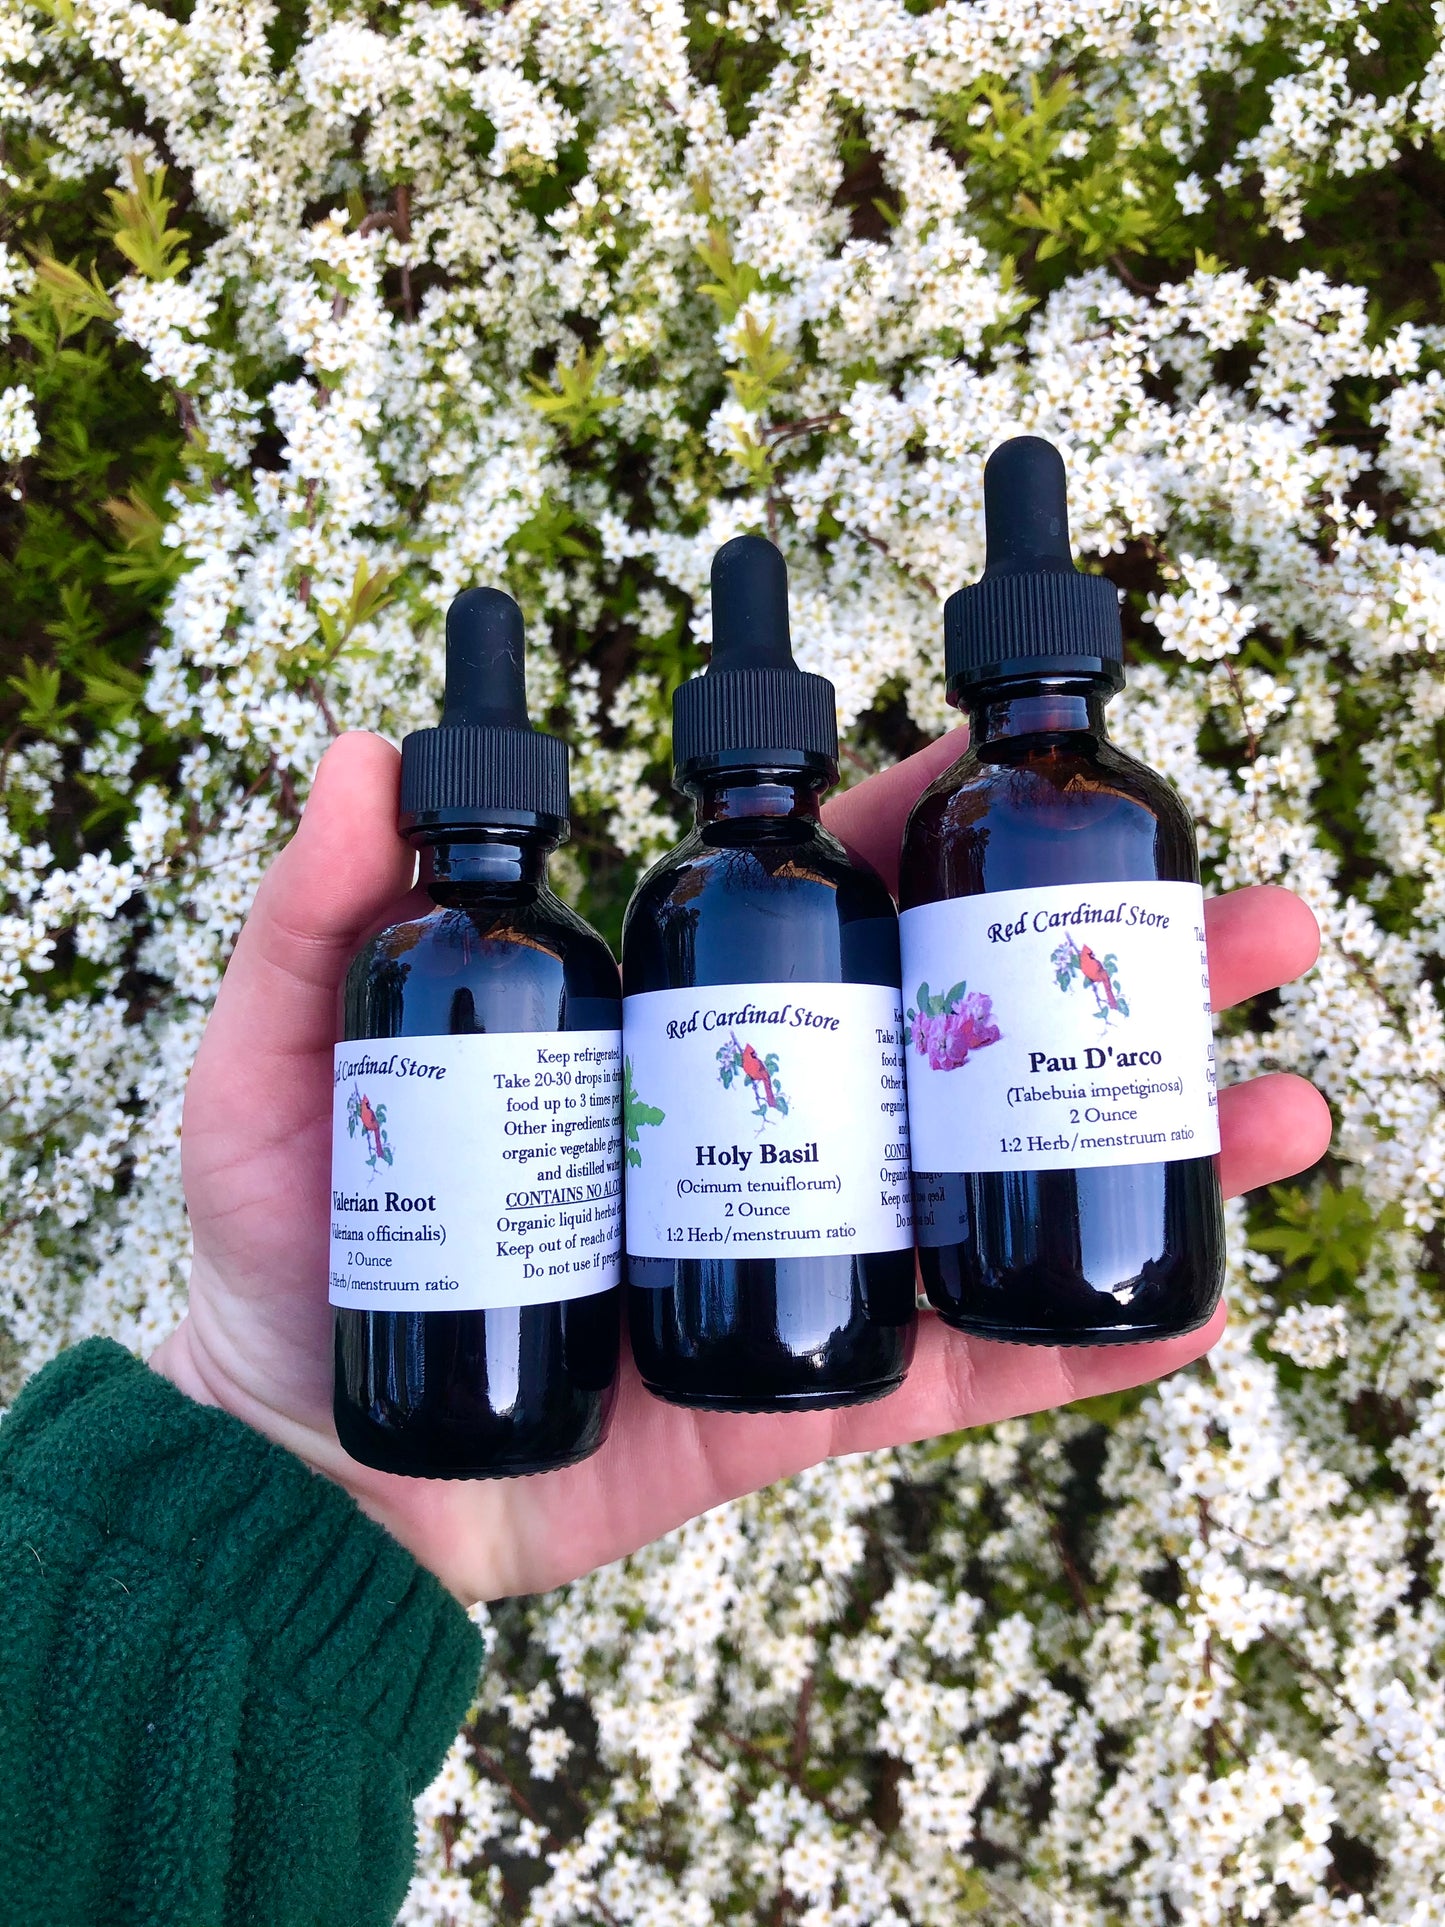 California Poppy Tincture Herb Extract Double Extraction